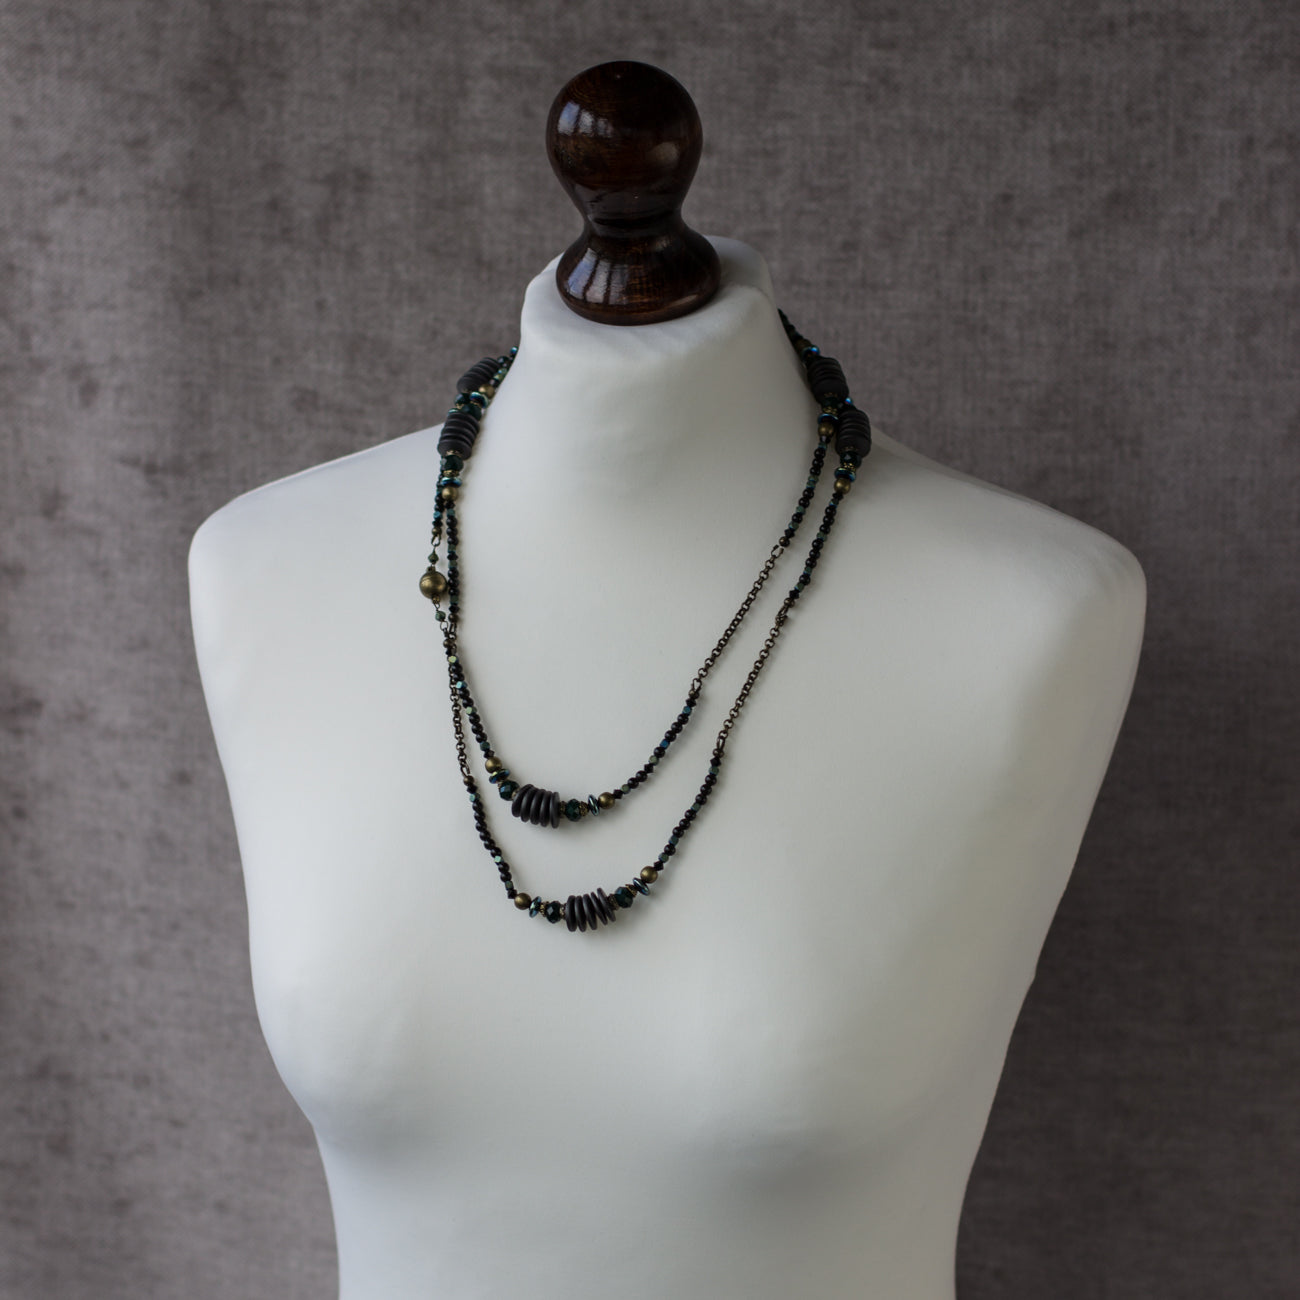 Shop a unique black and green long necklace, handmade from natural stone and glass. Opera necklace. Perfect as a one-of-a-kind gift.